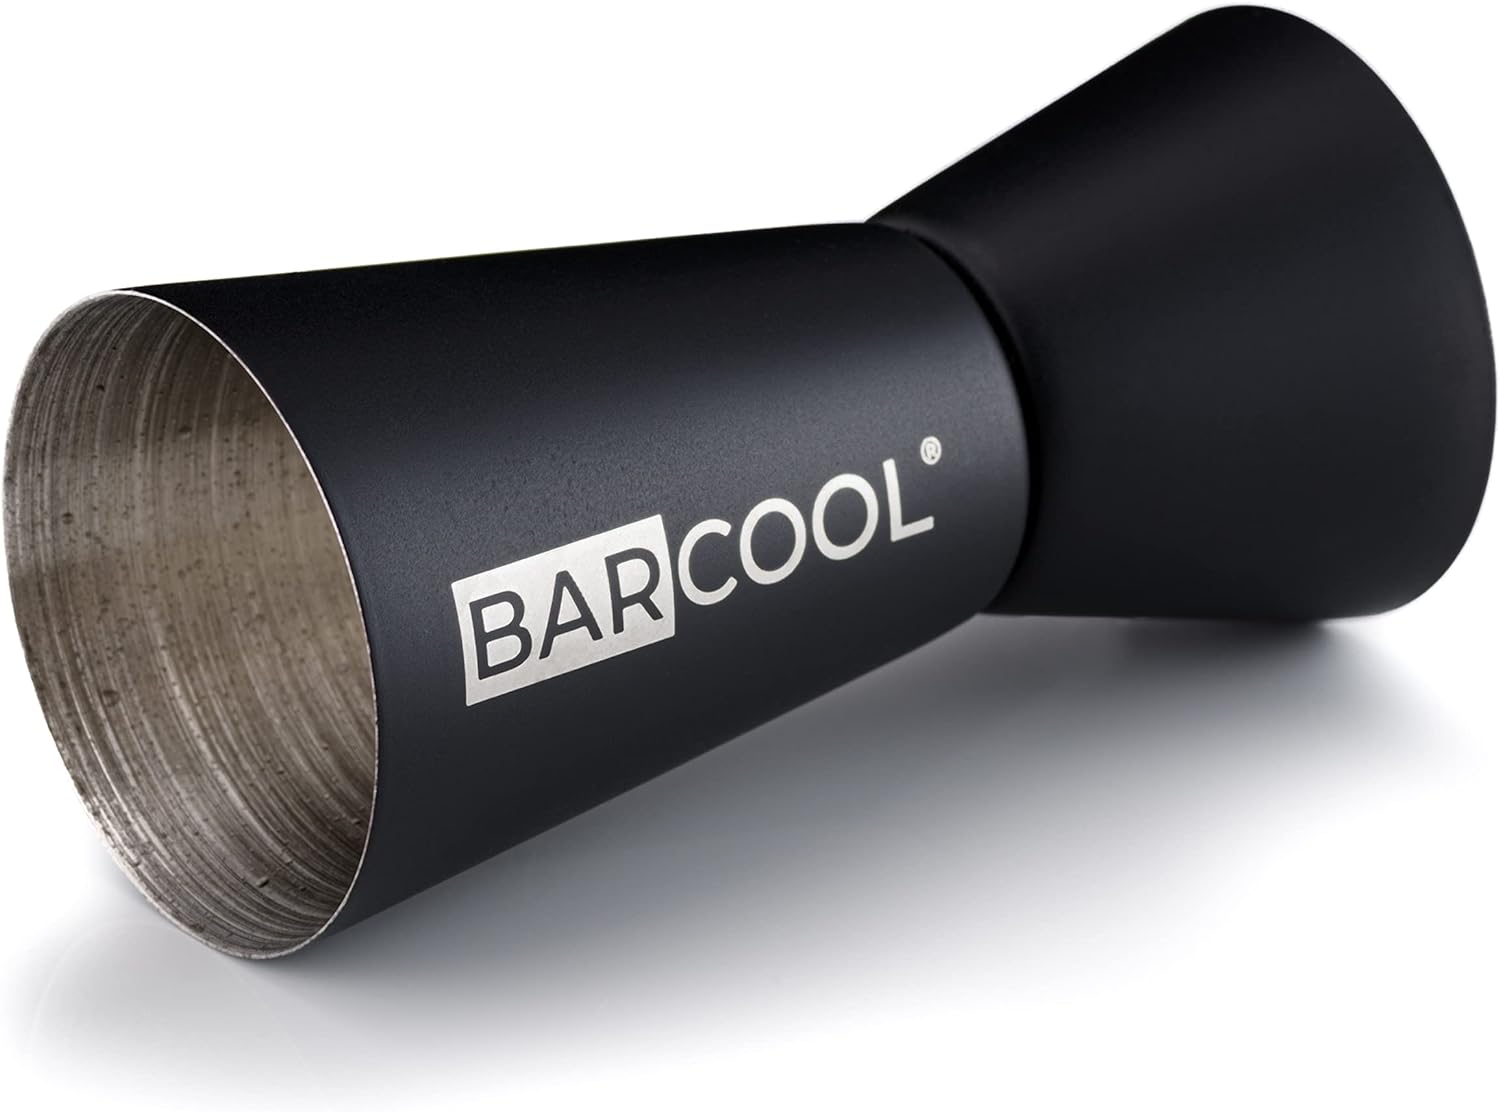 Barcool Bartenders Professional Cocktail Spirit Measure | Dual Sided Cup | Jigger 50ml 11417